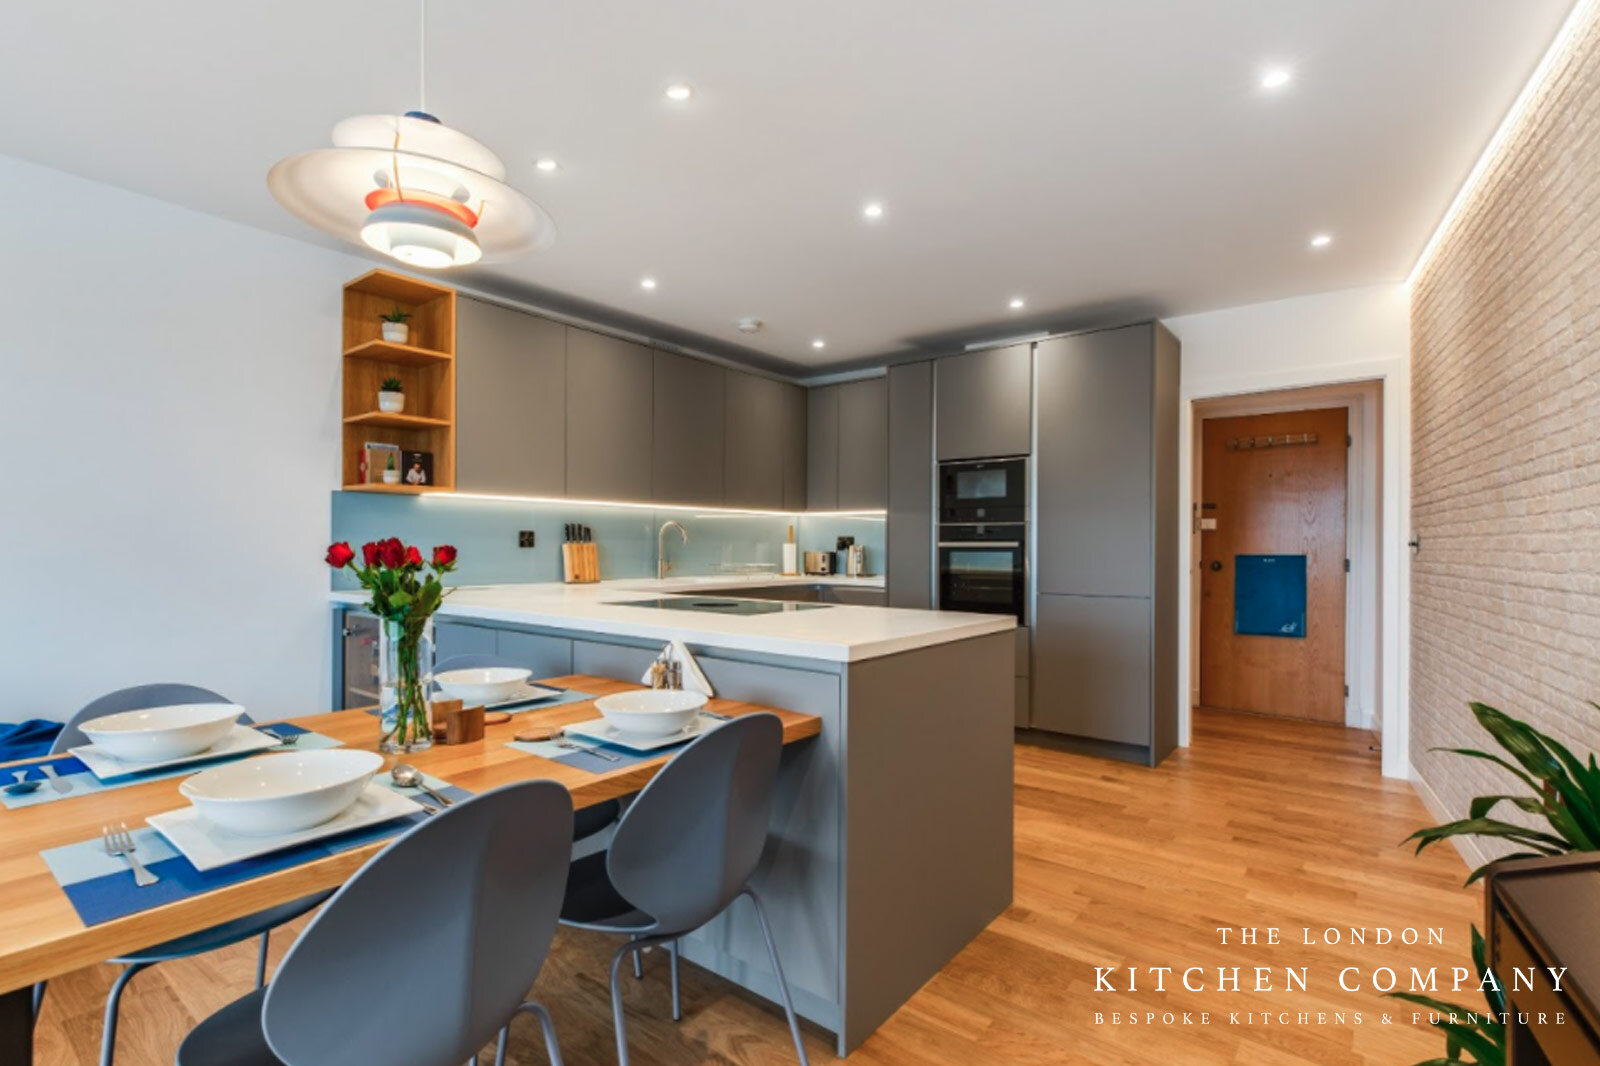 Bright ideas to light your kitchen right — The London Kitchen Company